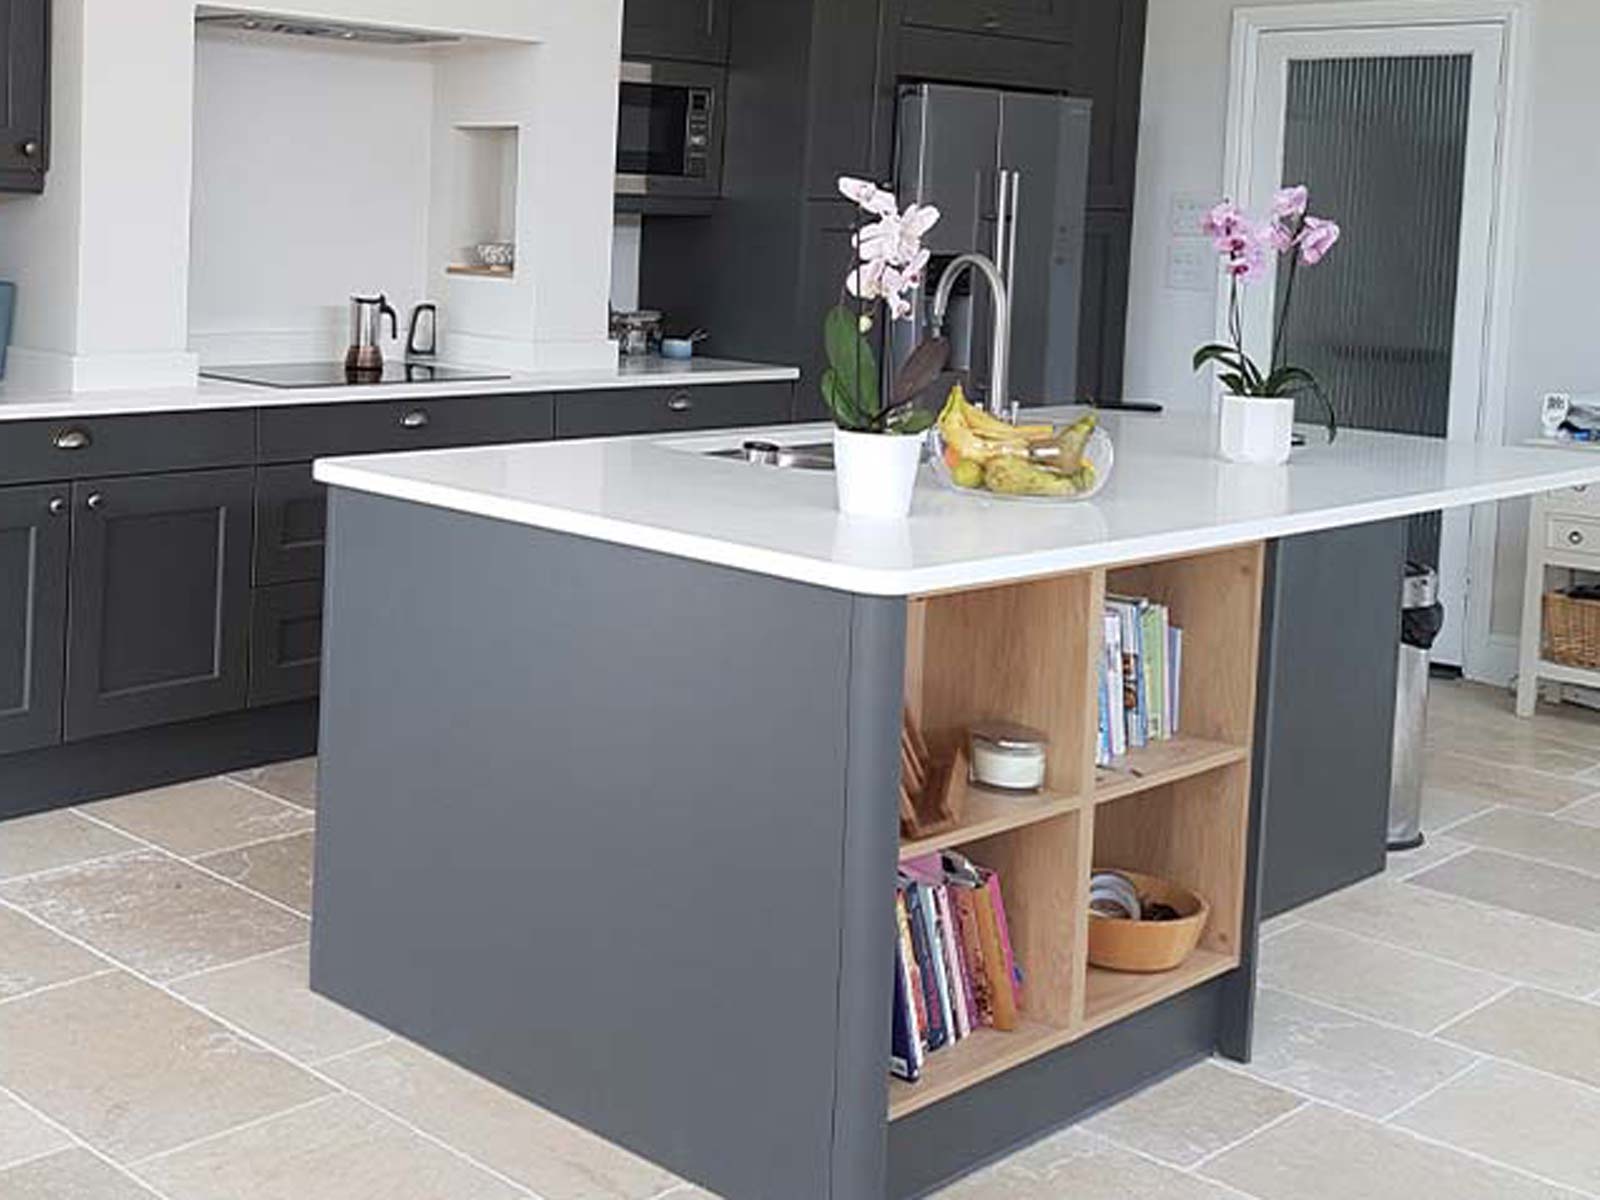 Kitchen island with open shelving design feature